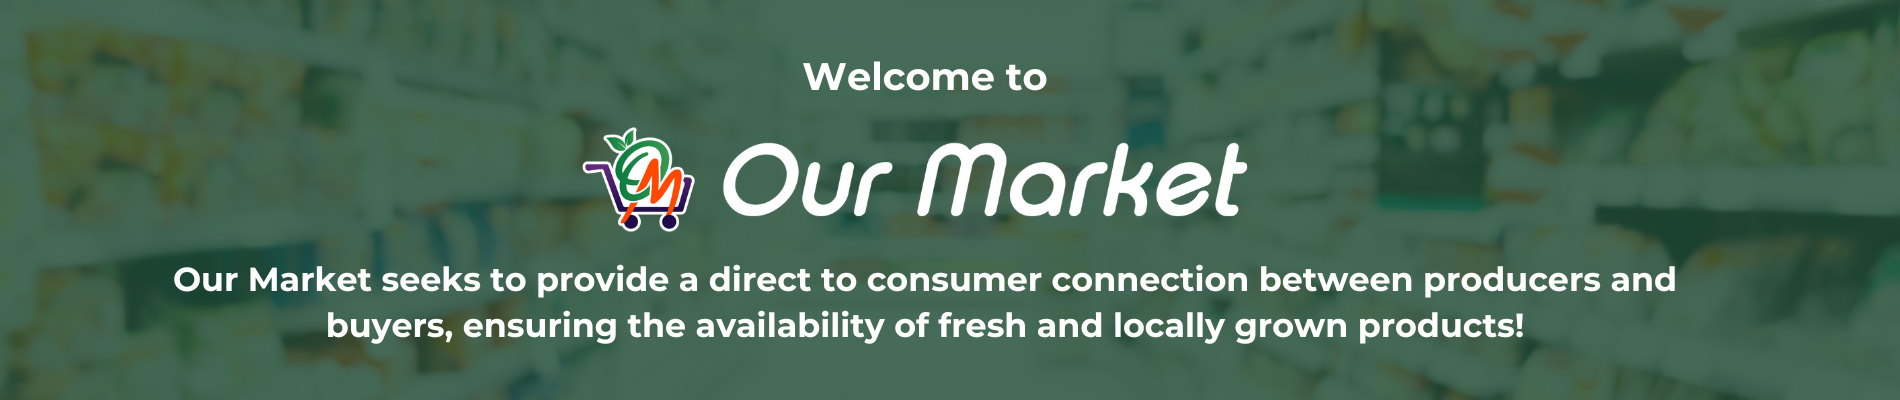 Welcome OurMarket Banner